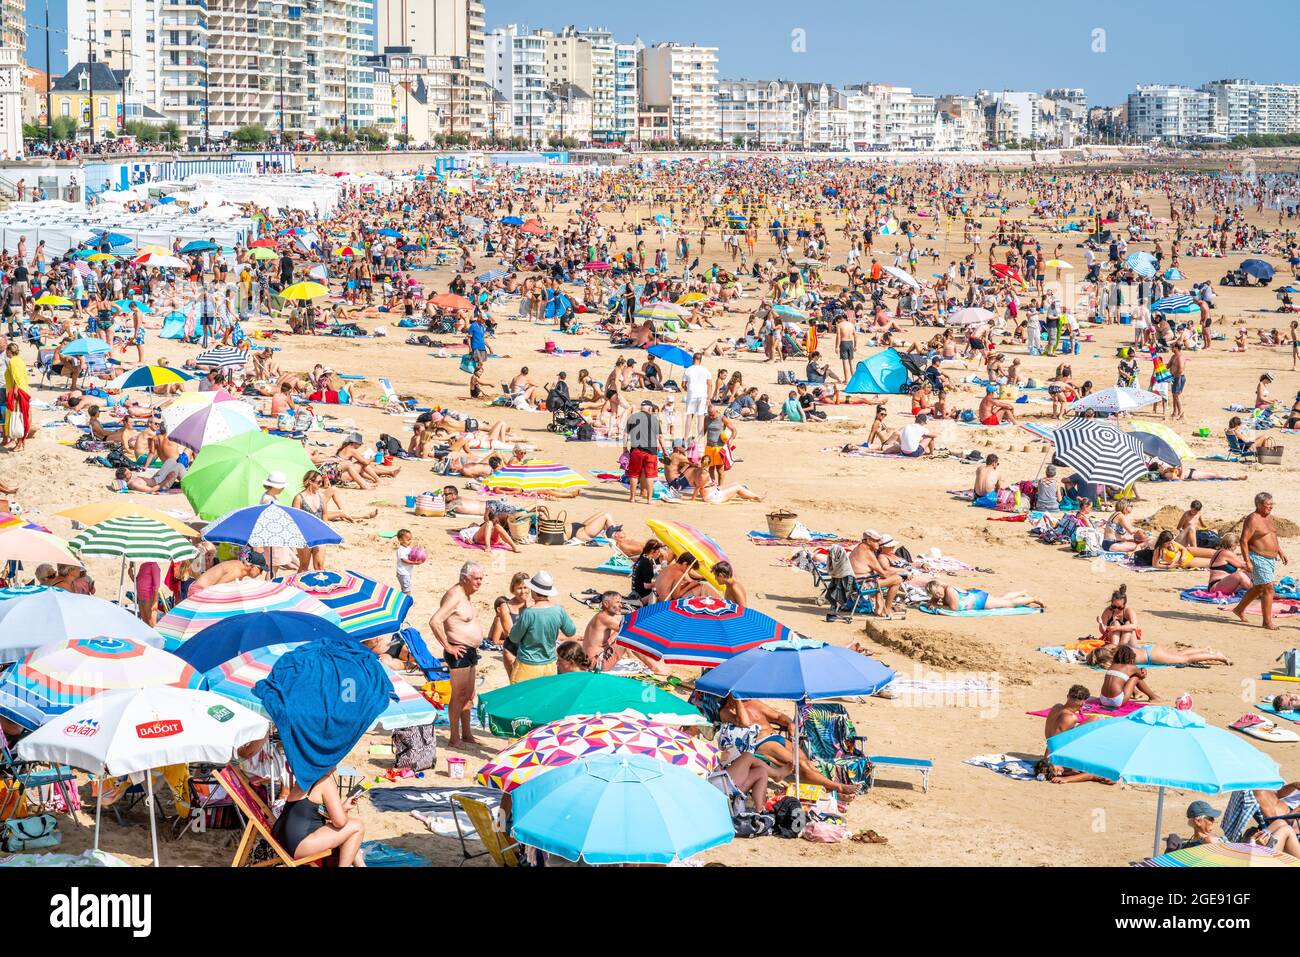 12 August 2021 , Les Sables d’Olonne France : View of La Grande Plage beach of Les Sables d’Olonne crowded with people during summer 2021 on France At Stock Photo